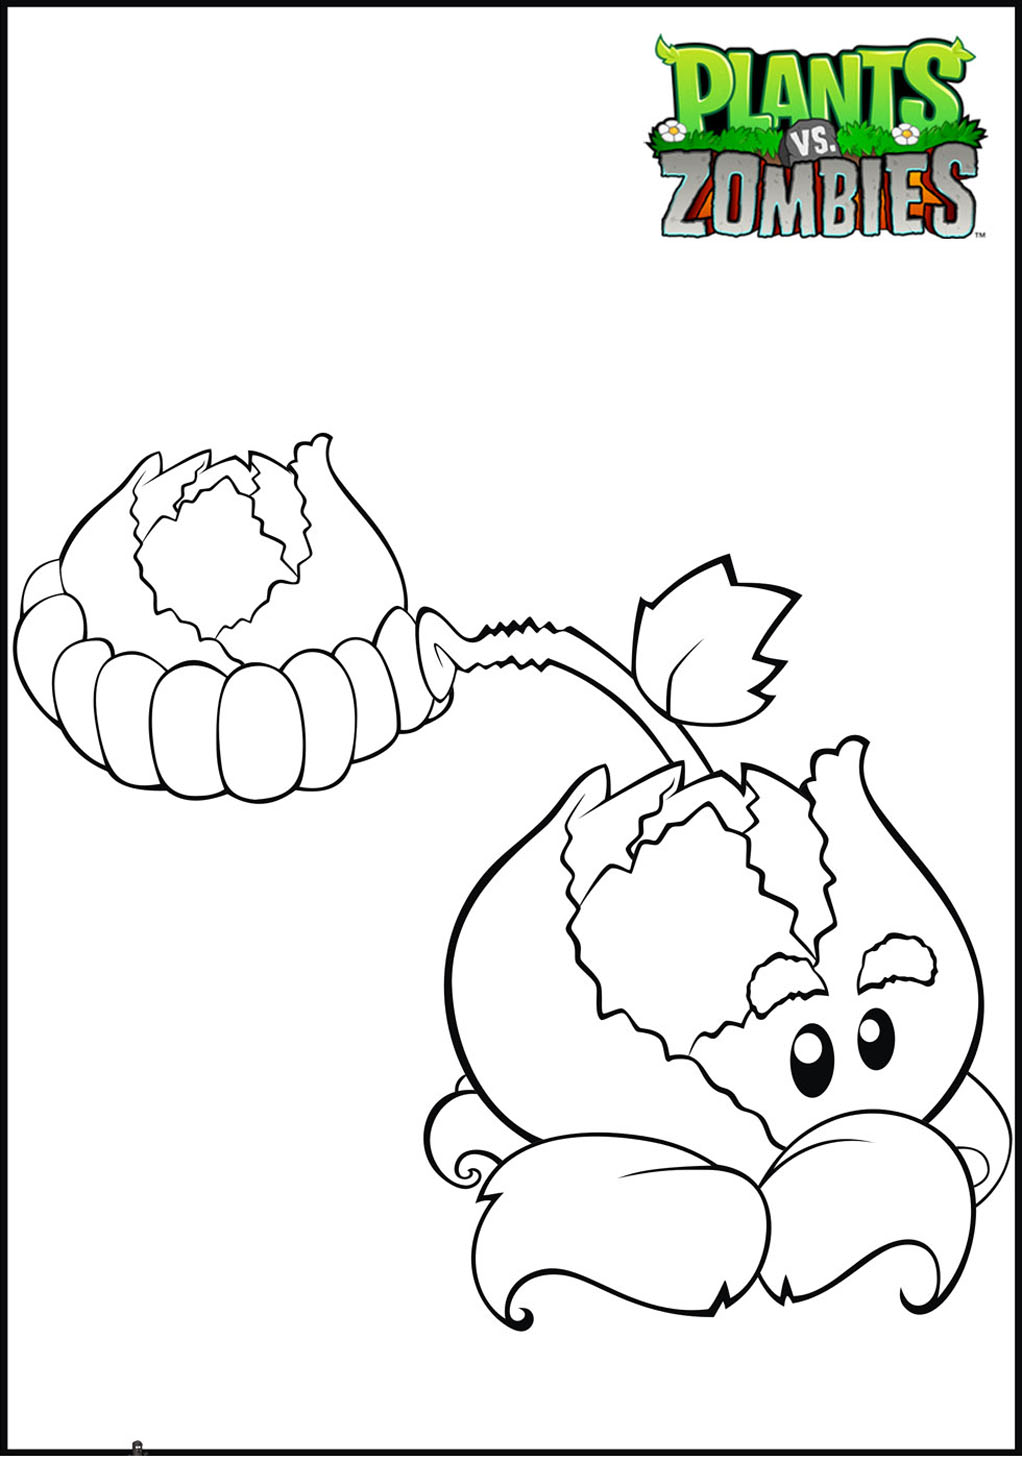 plants-vs-zombie-printable-and-colorable-image-plants-vs-zombies-kids-coloring-pages